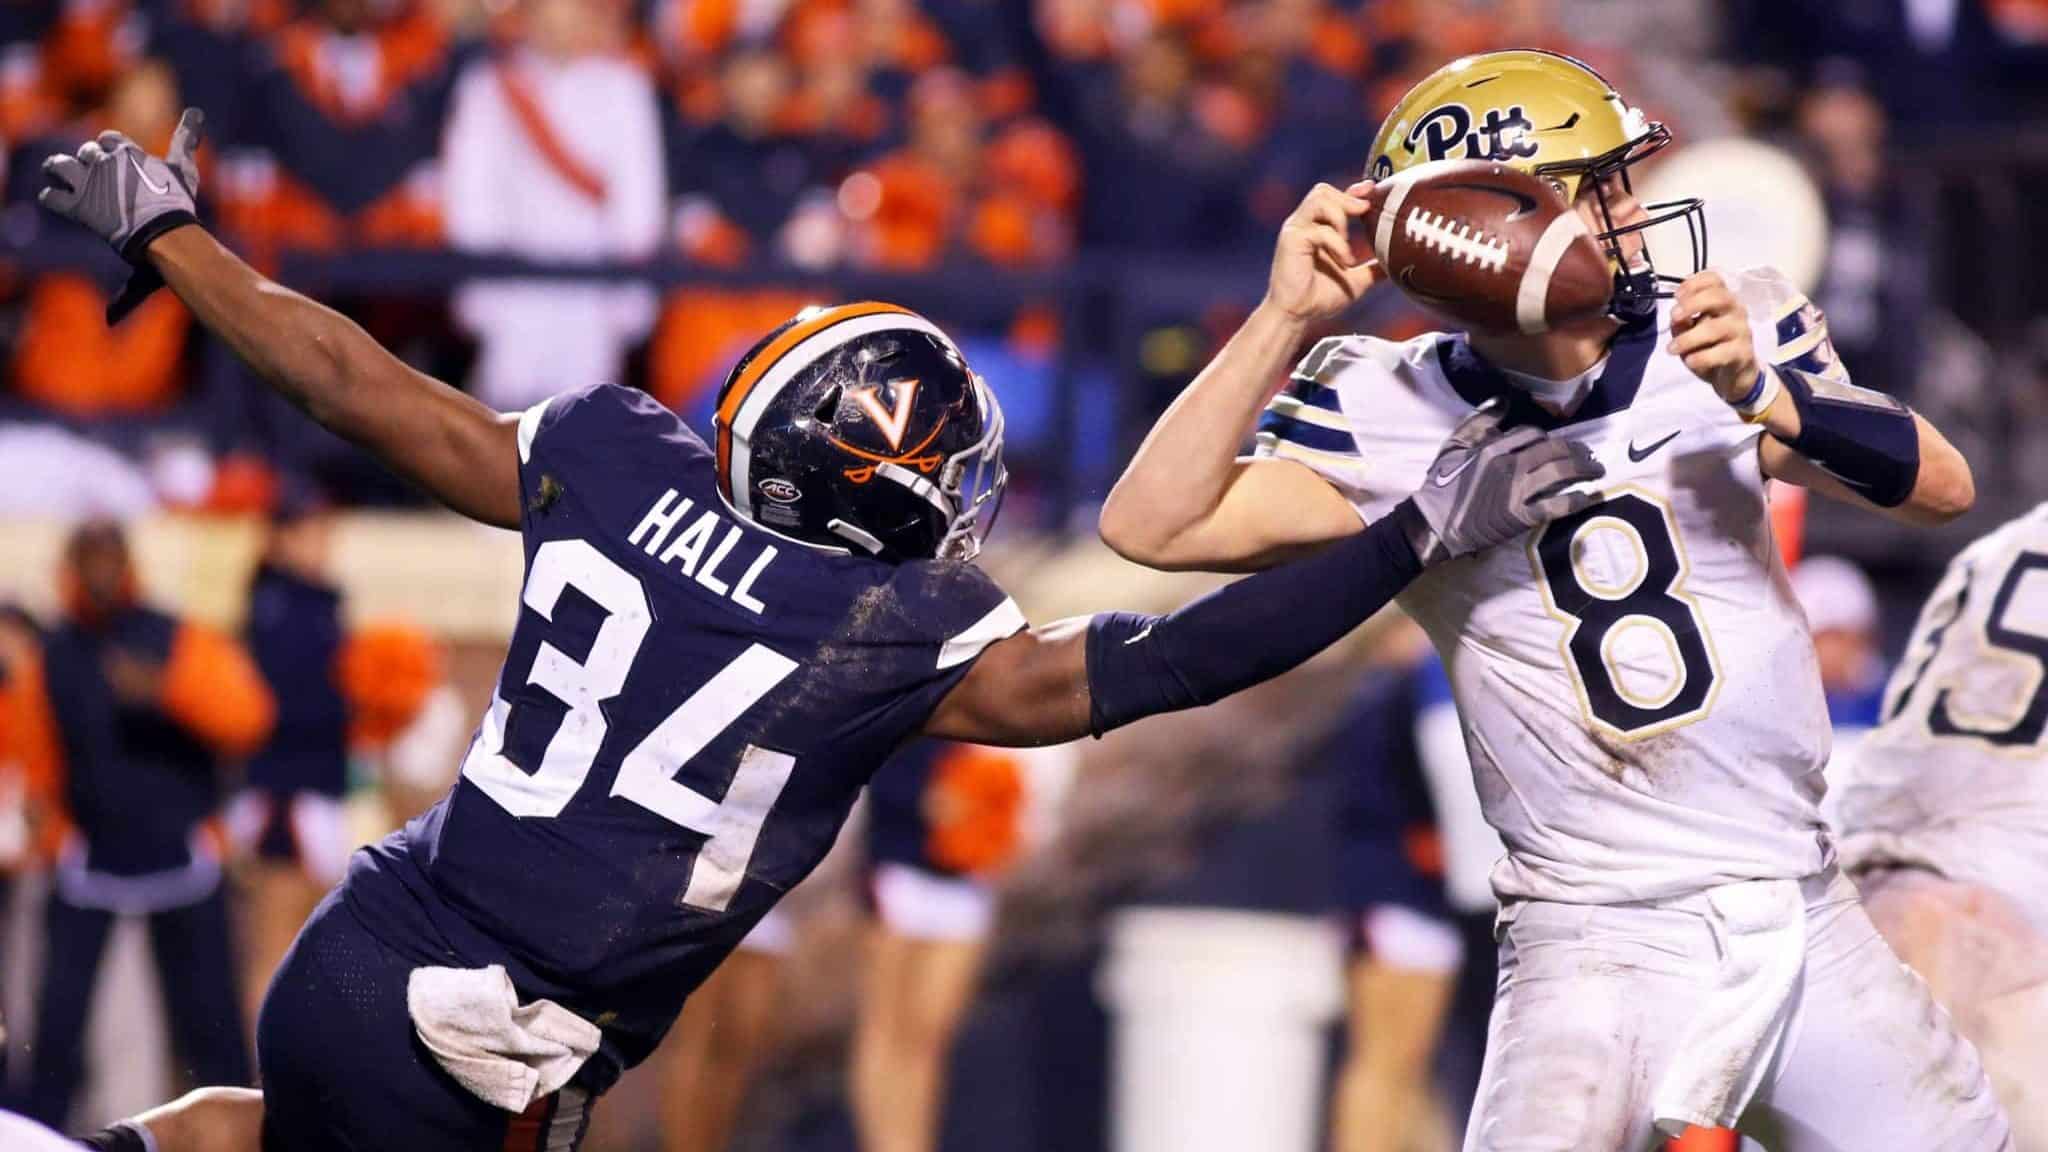 CHARLOTTESVILLE, VA - NOVEMBER 02: Bryce Hall #34 of the Virginia Cavaliers disrupts a pass by Kenny Pickett #8 of the Pittsburgh Panthers in the second half during a game at Scott Stadium on November 2, 2018 in Charlottesville, Virginia.